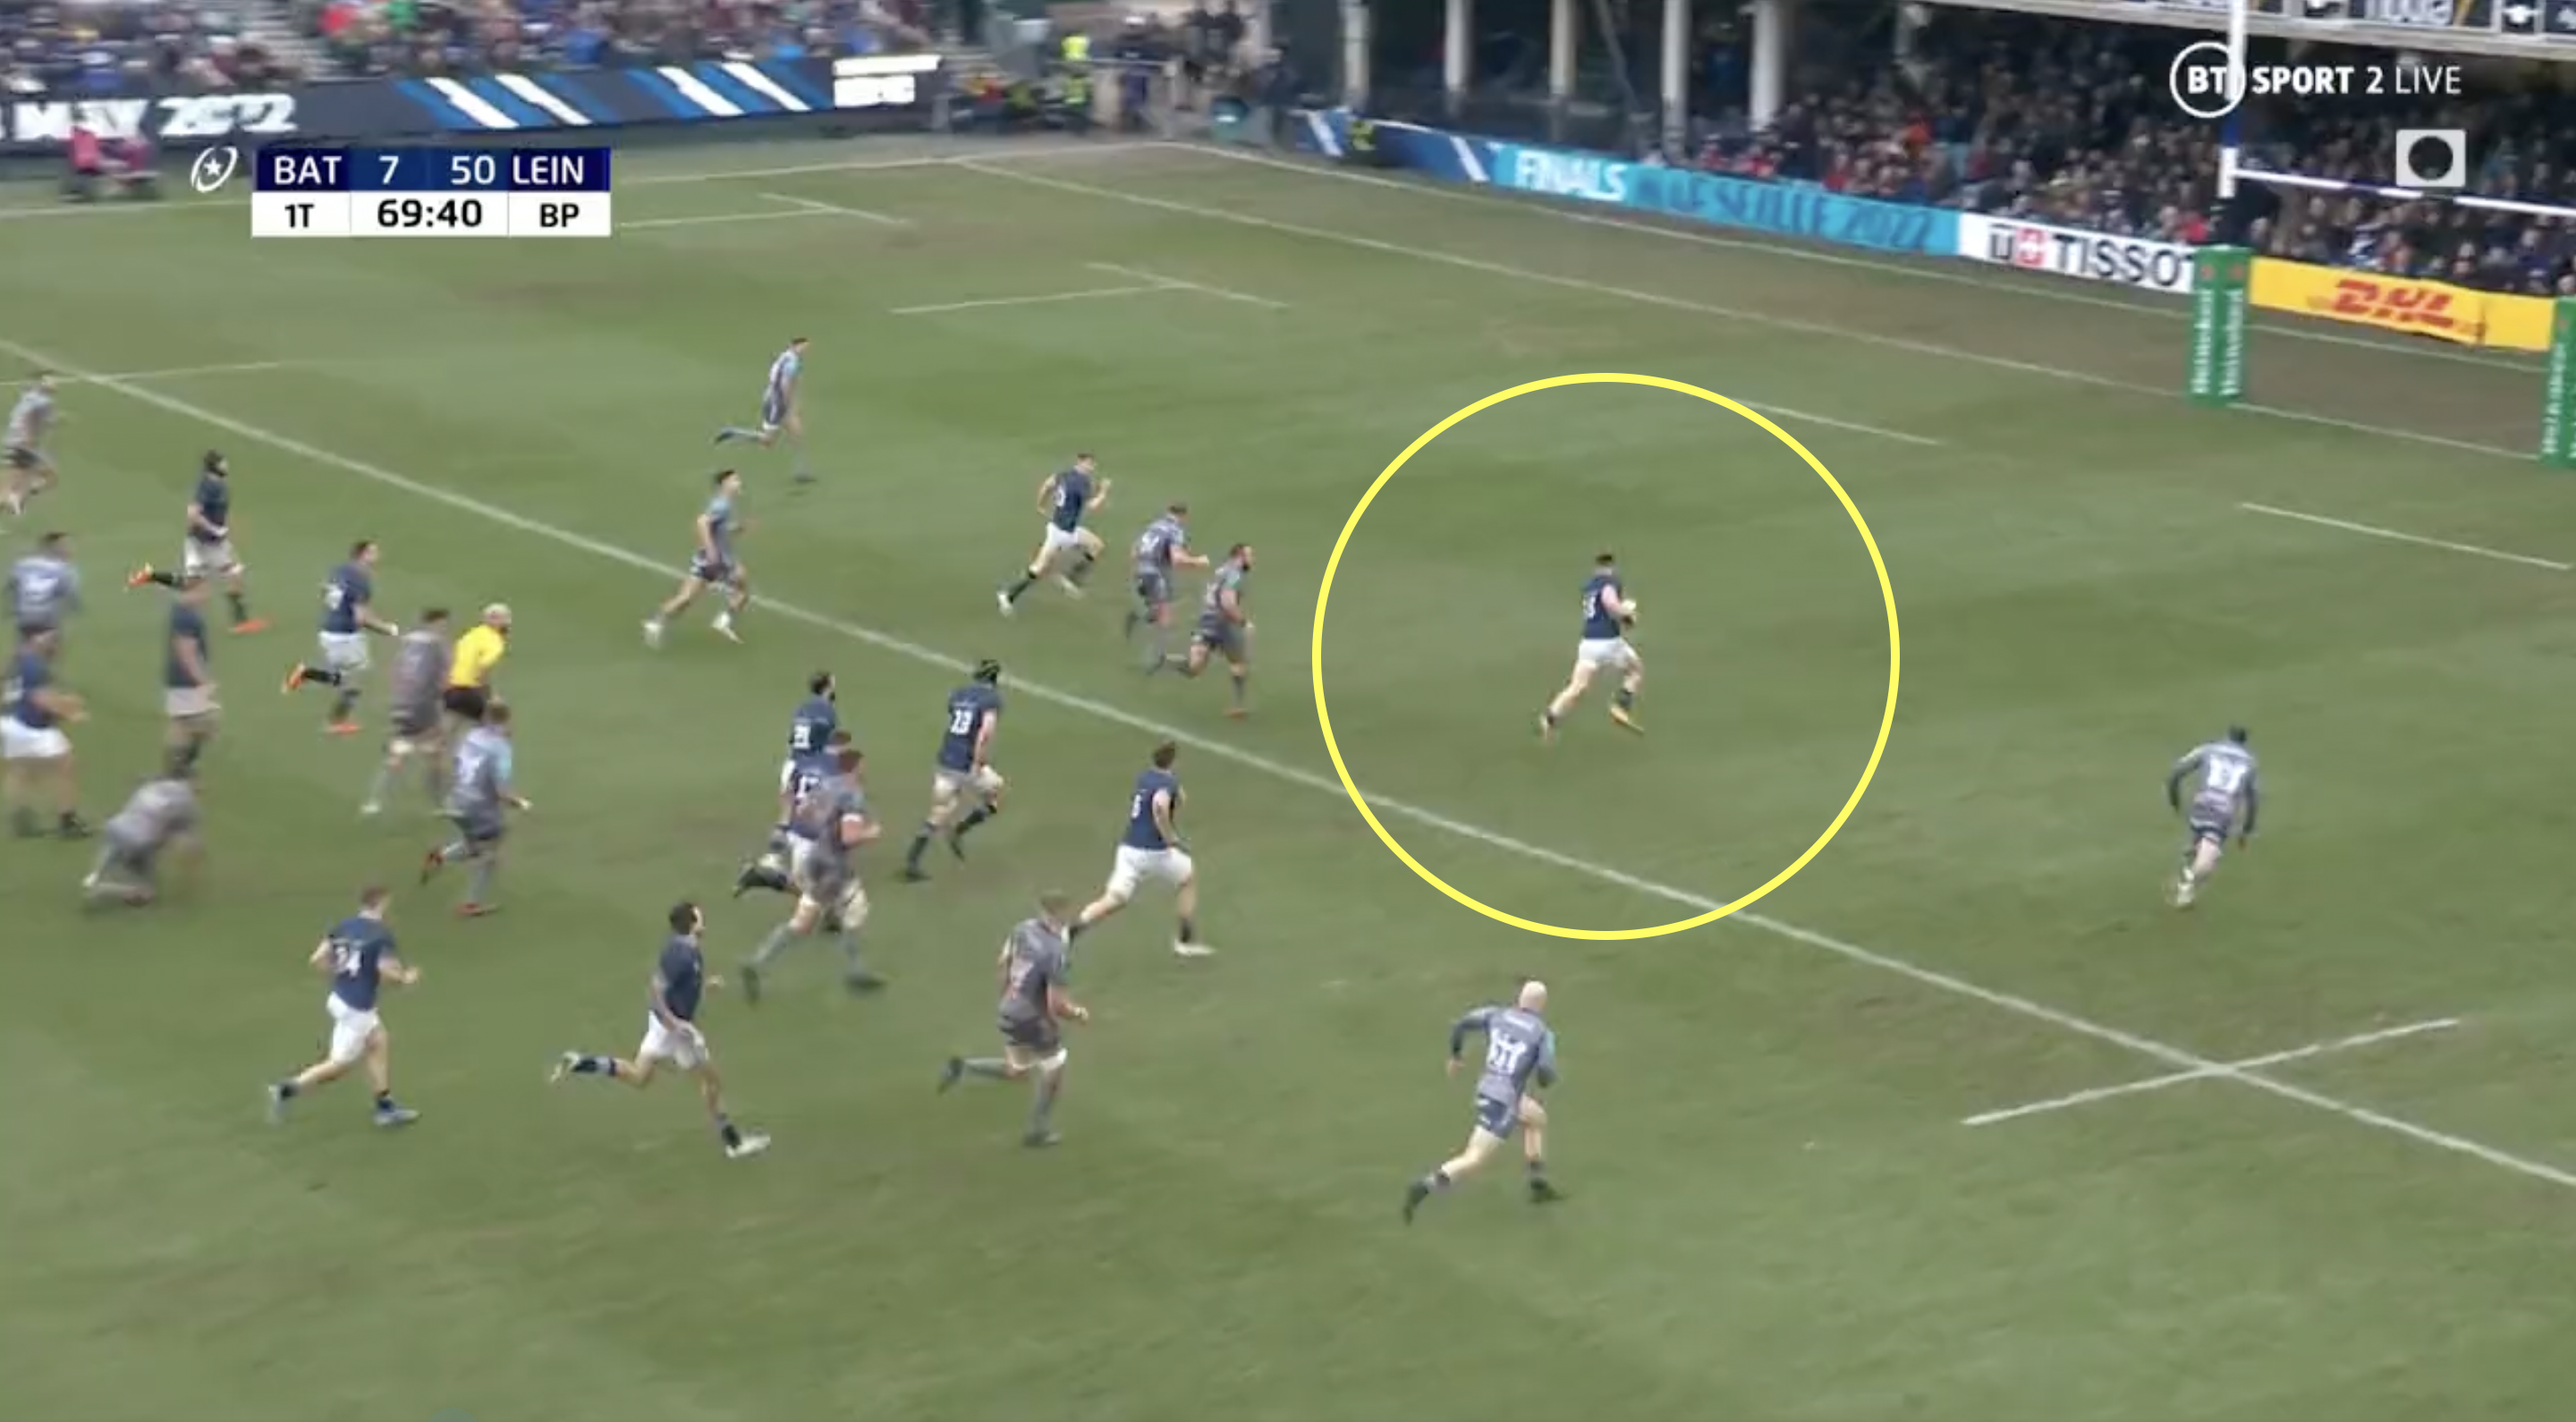 Leinster achieve genuine rugby perfection with this try against Bath